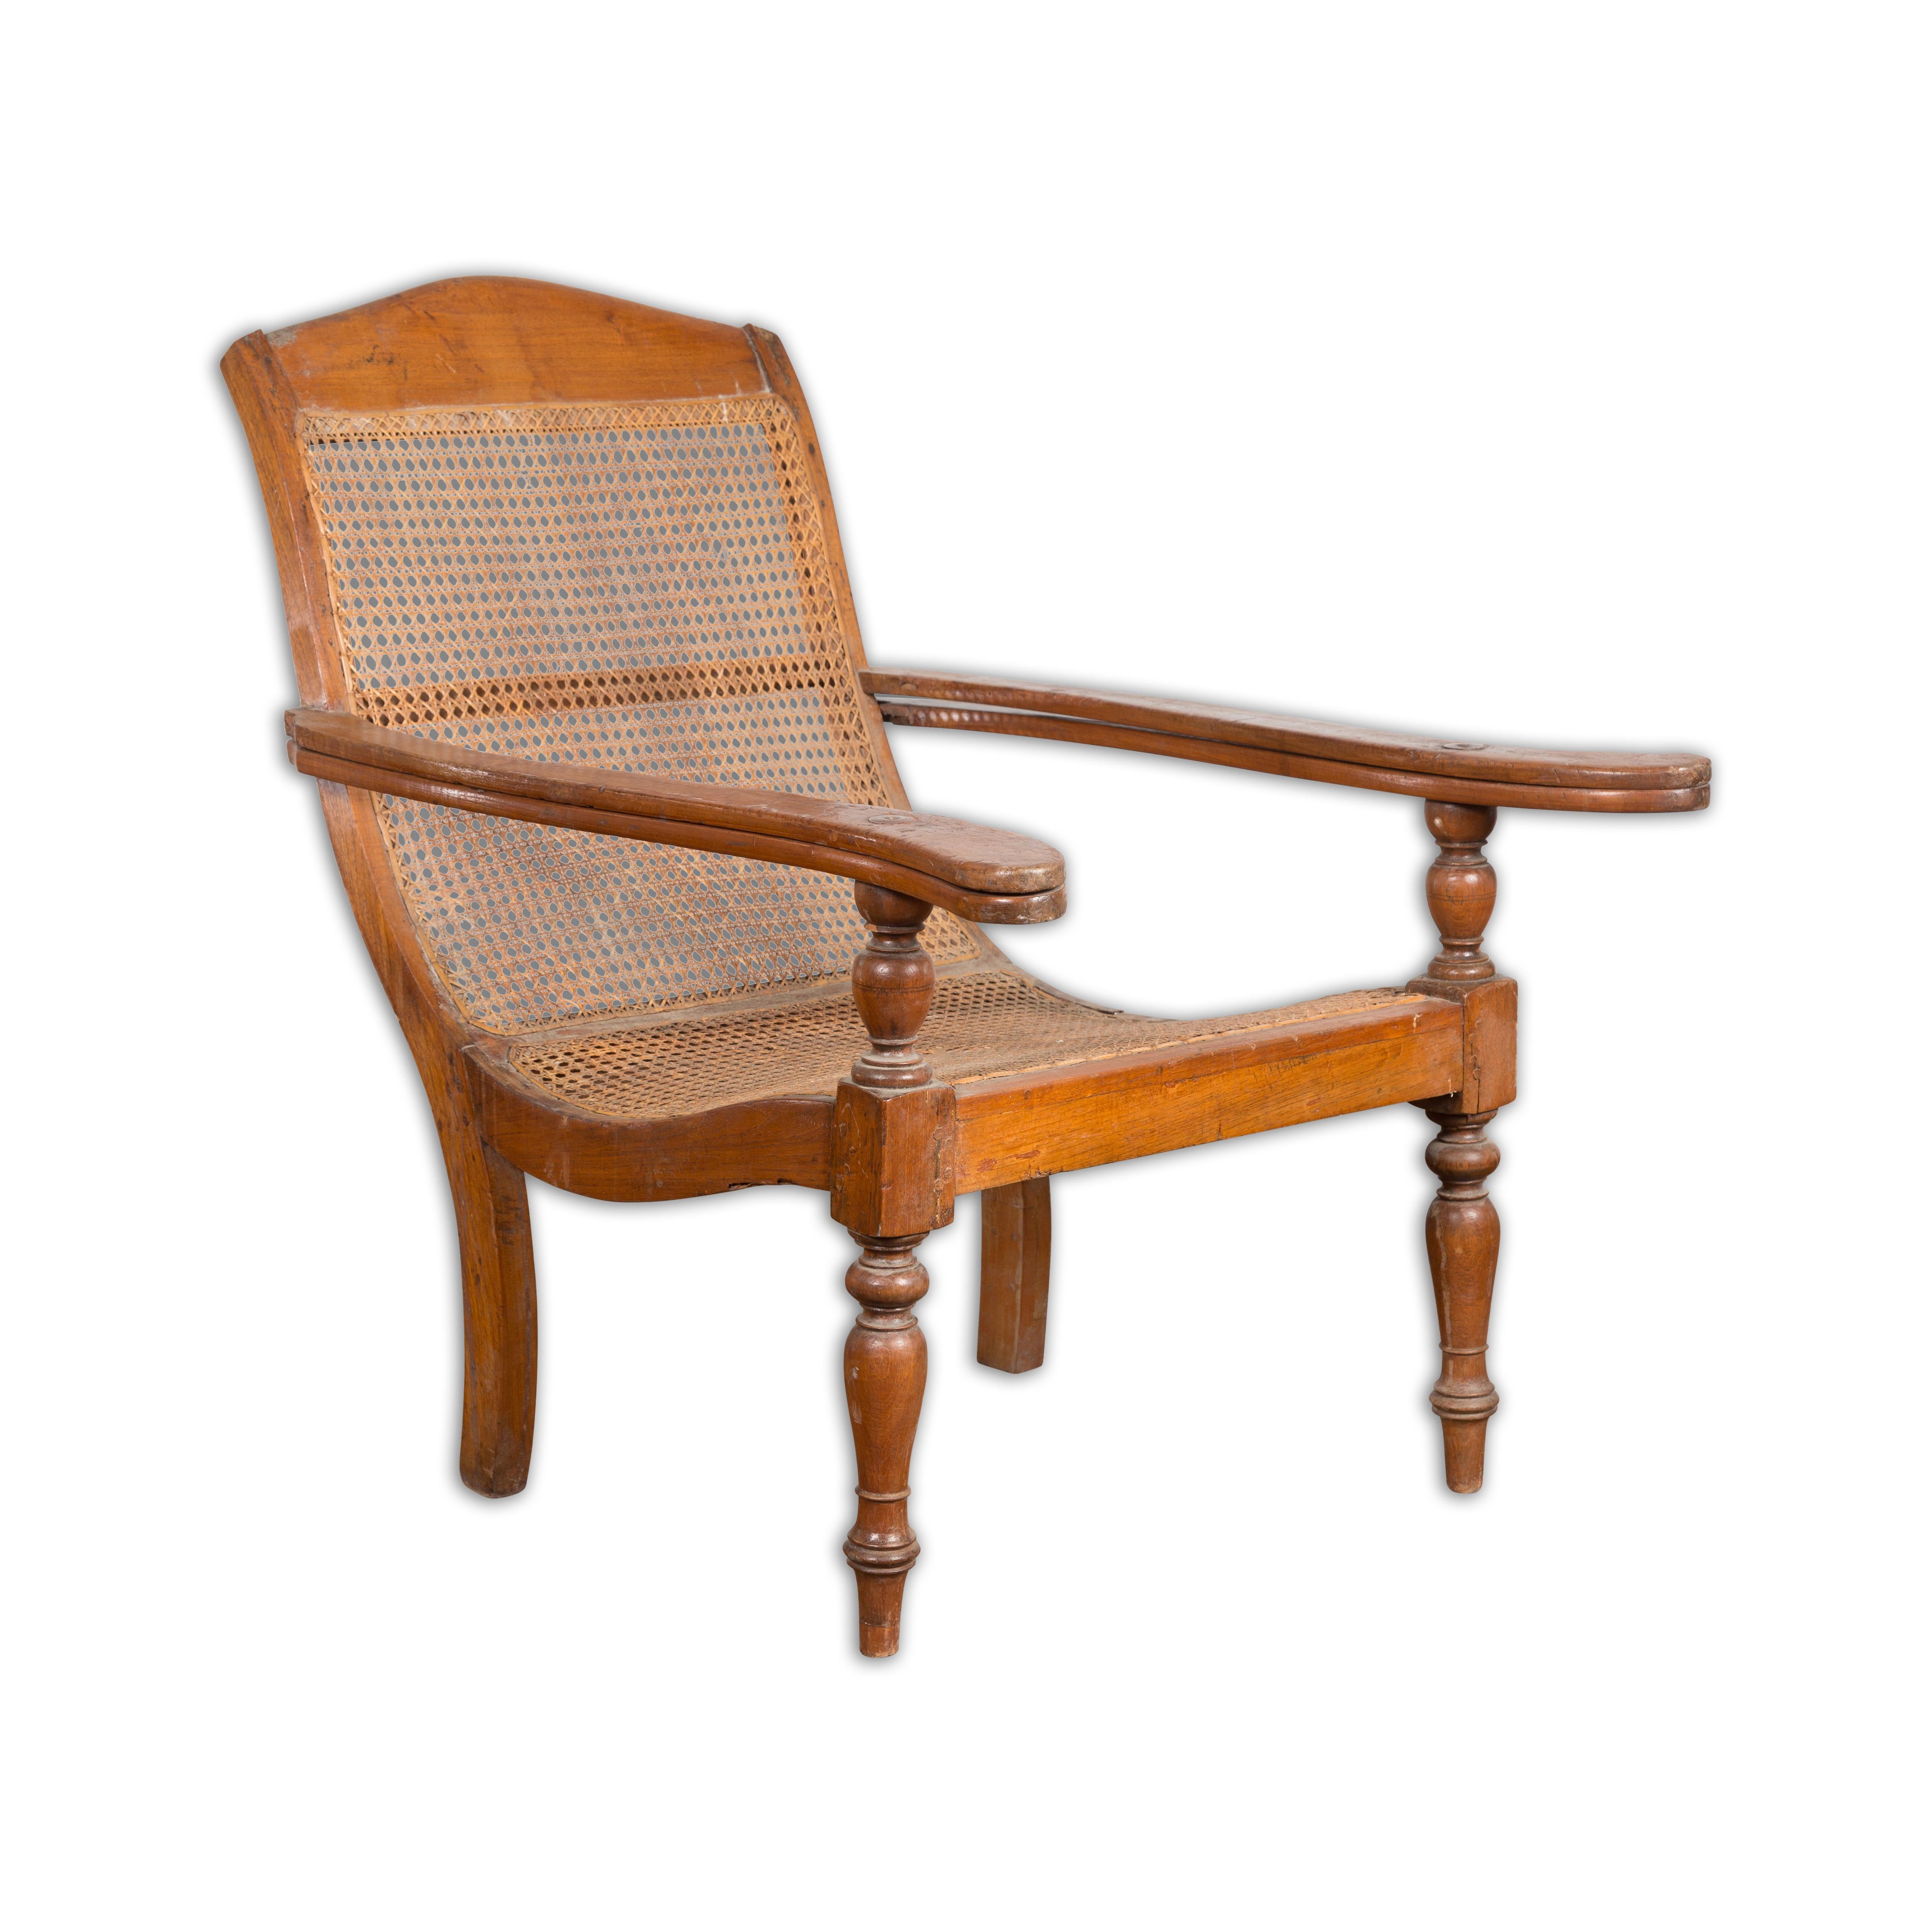 Dutch Colonial Indonesian Cane and Wood Plantation Chair with Extending Arms For Sale 12